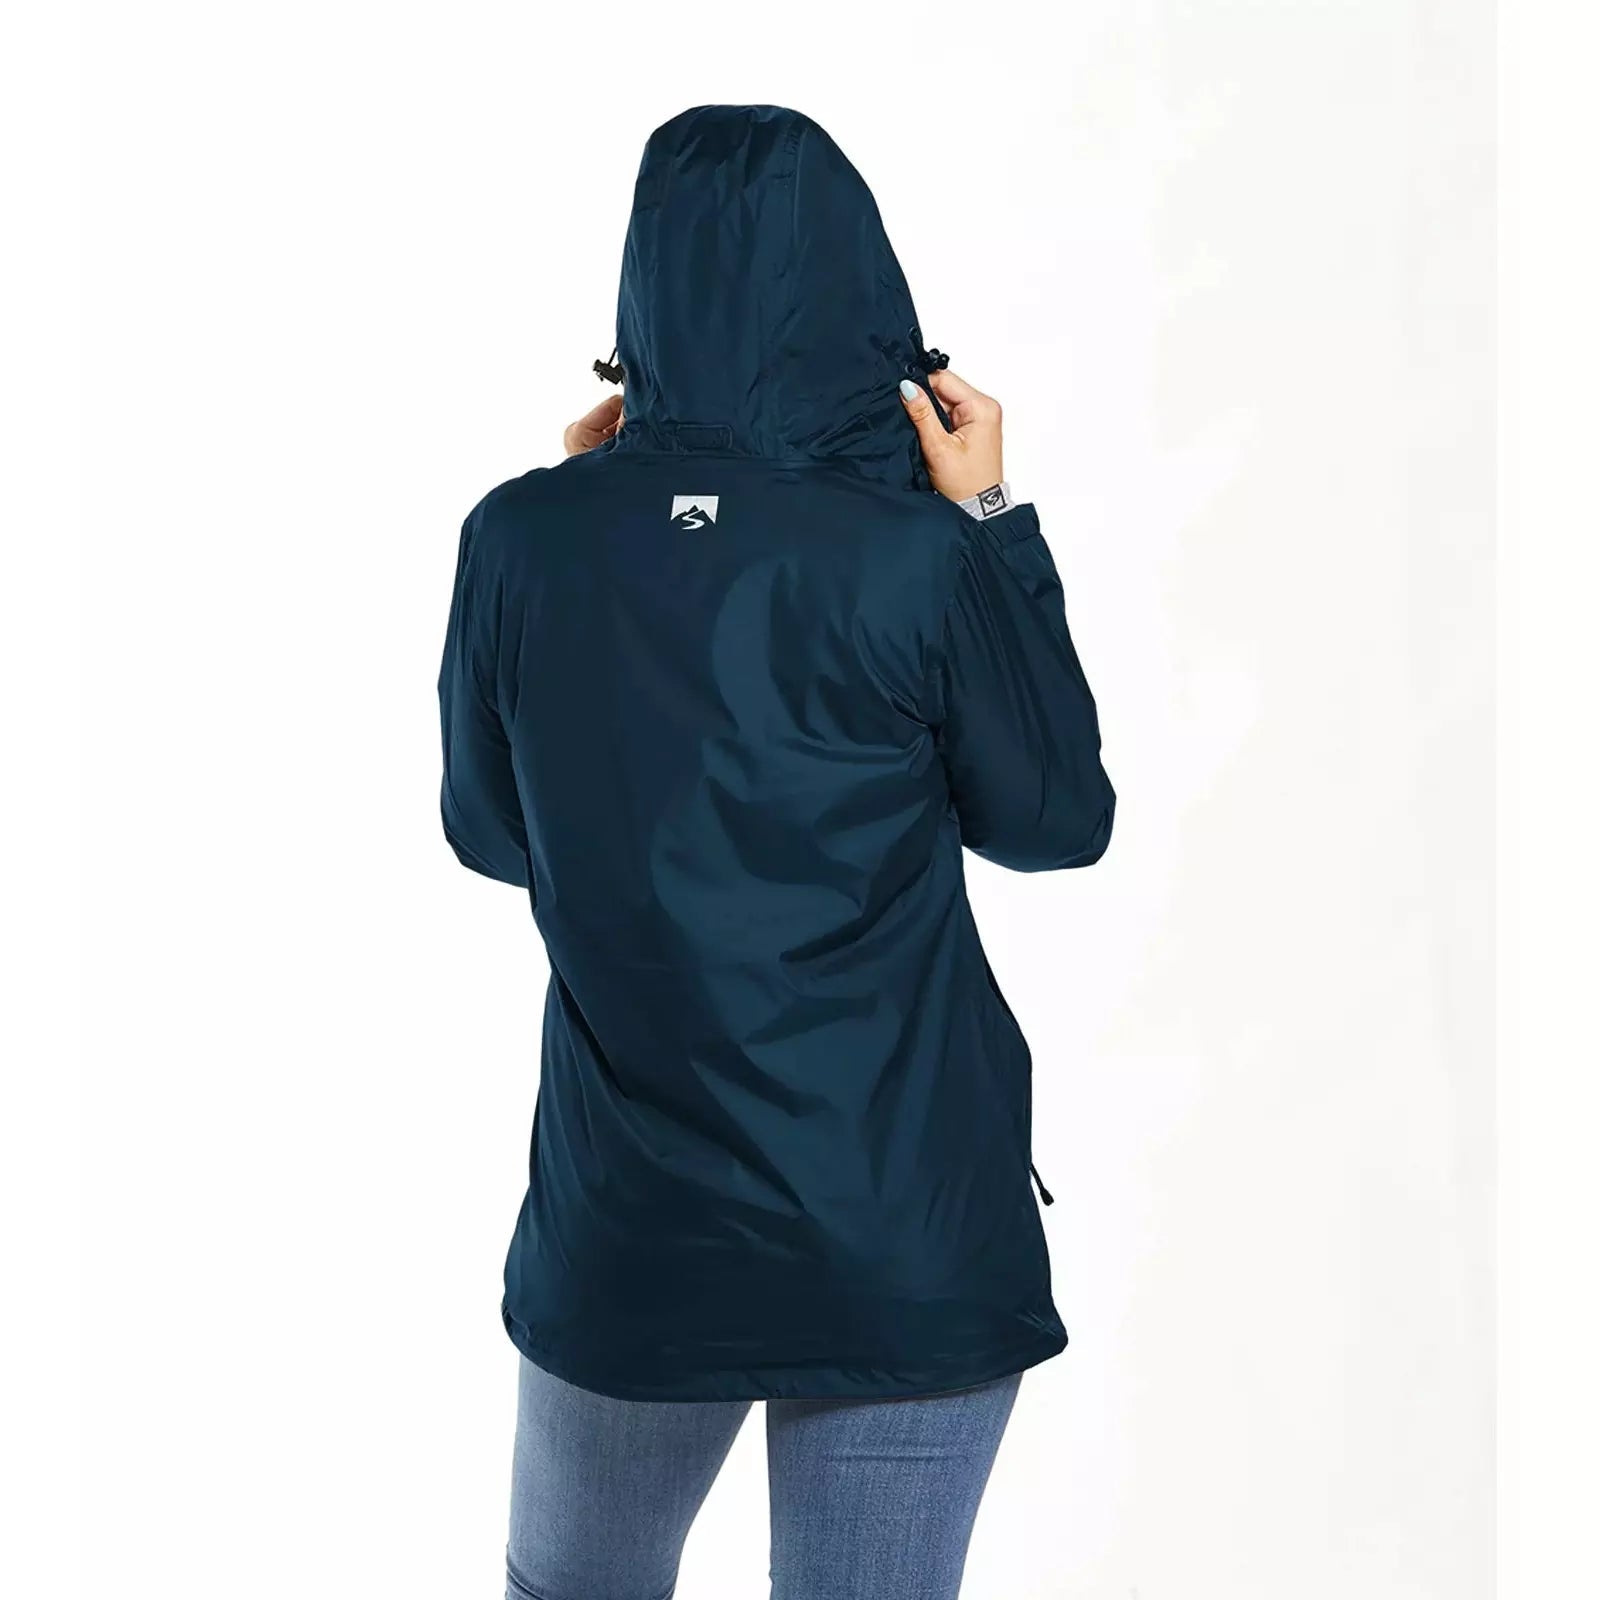 Chaqueta impermeable Voyager para mujer